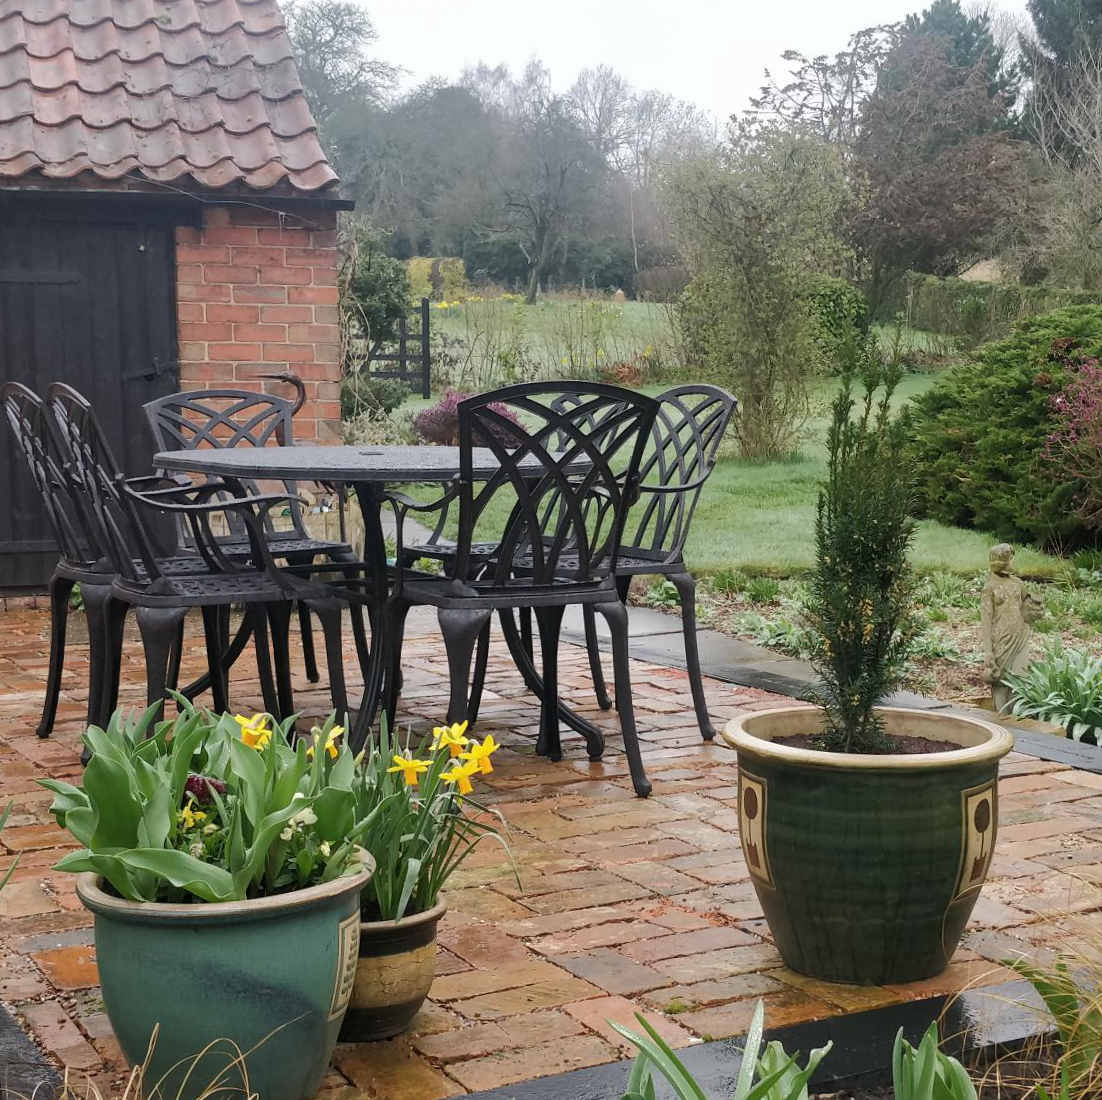 Protect our metal garden furniture from rain